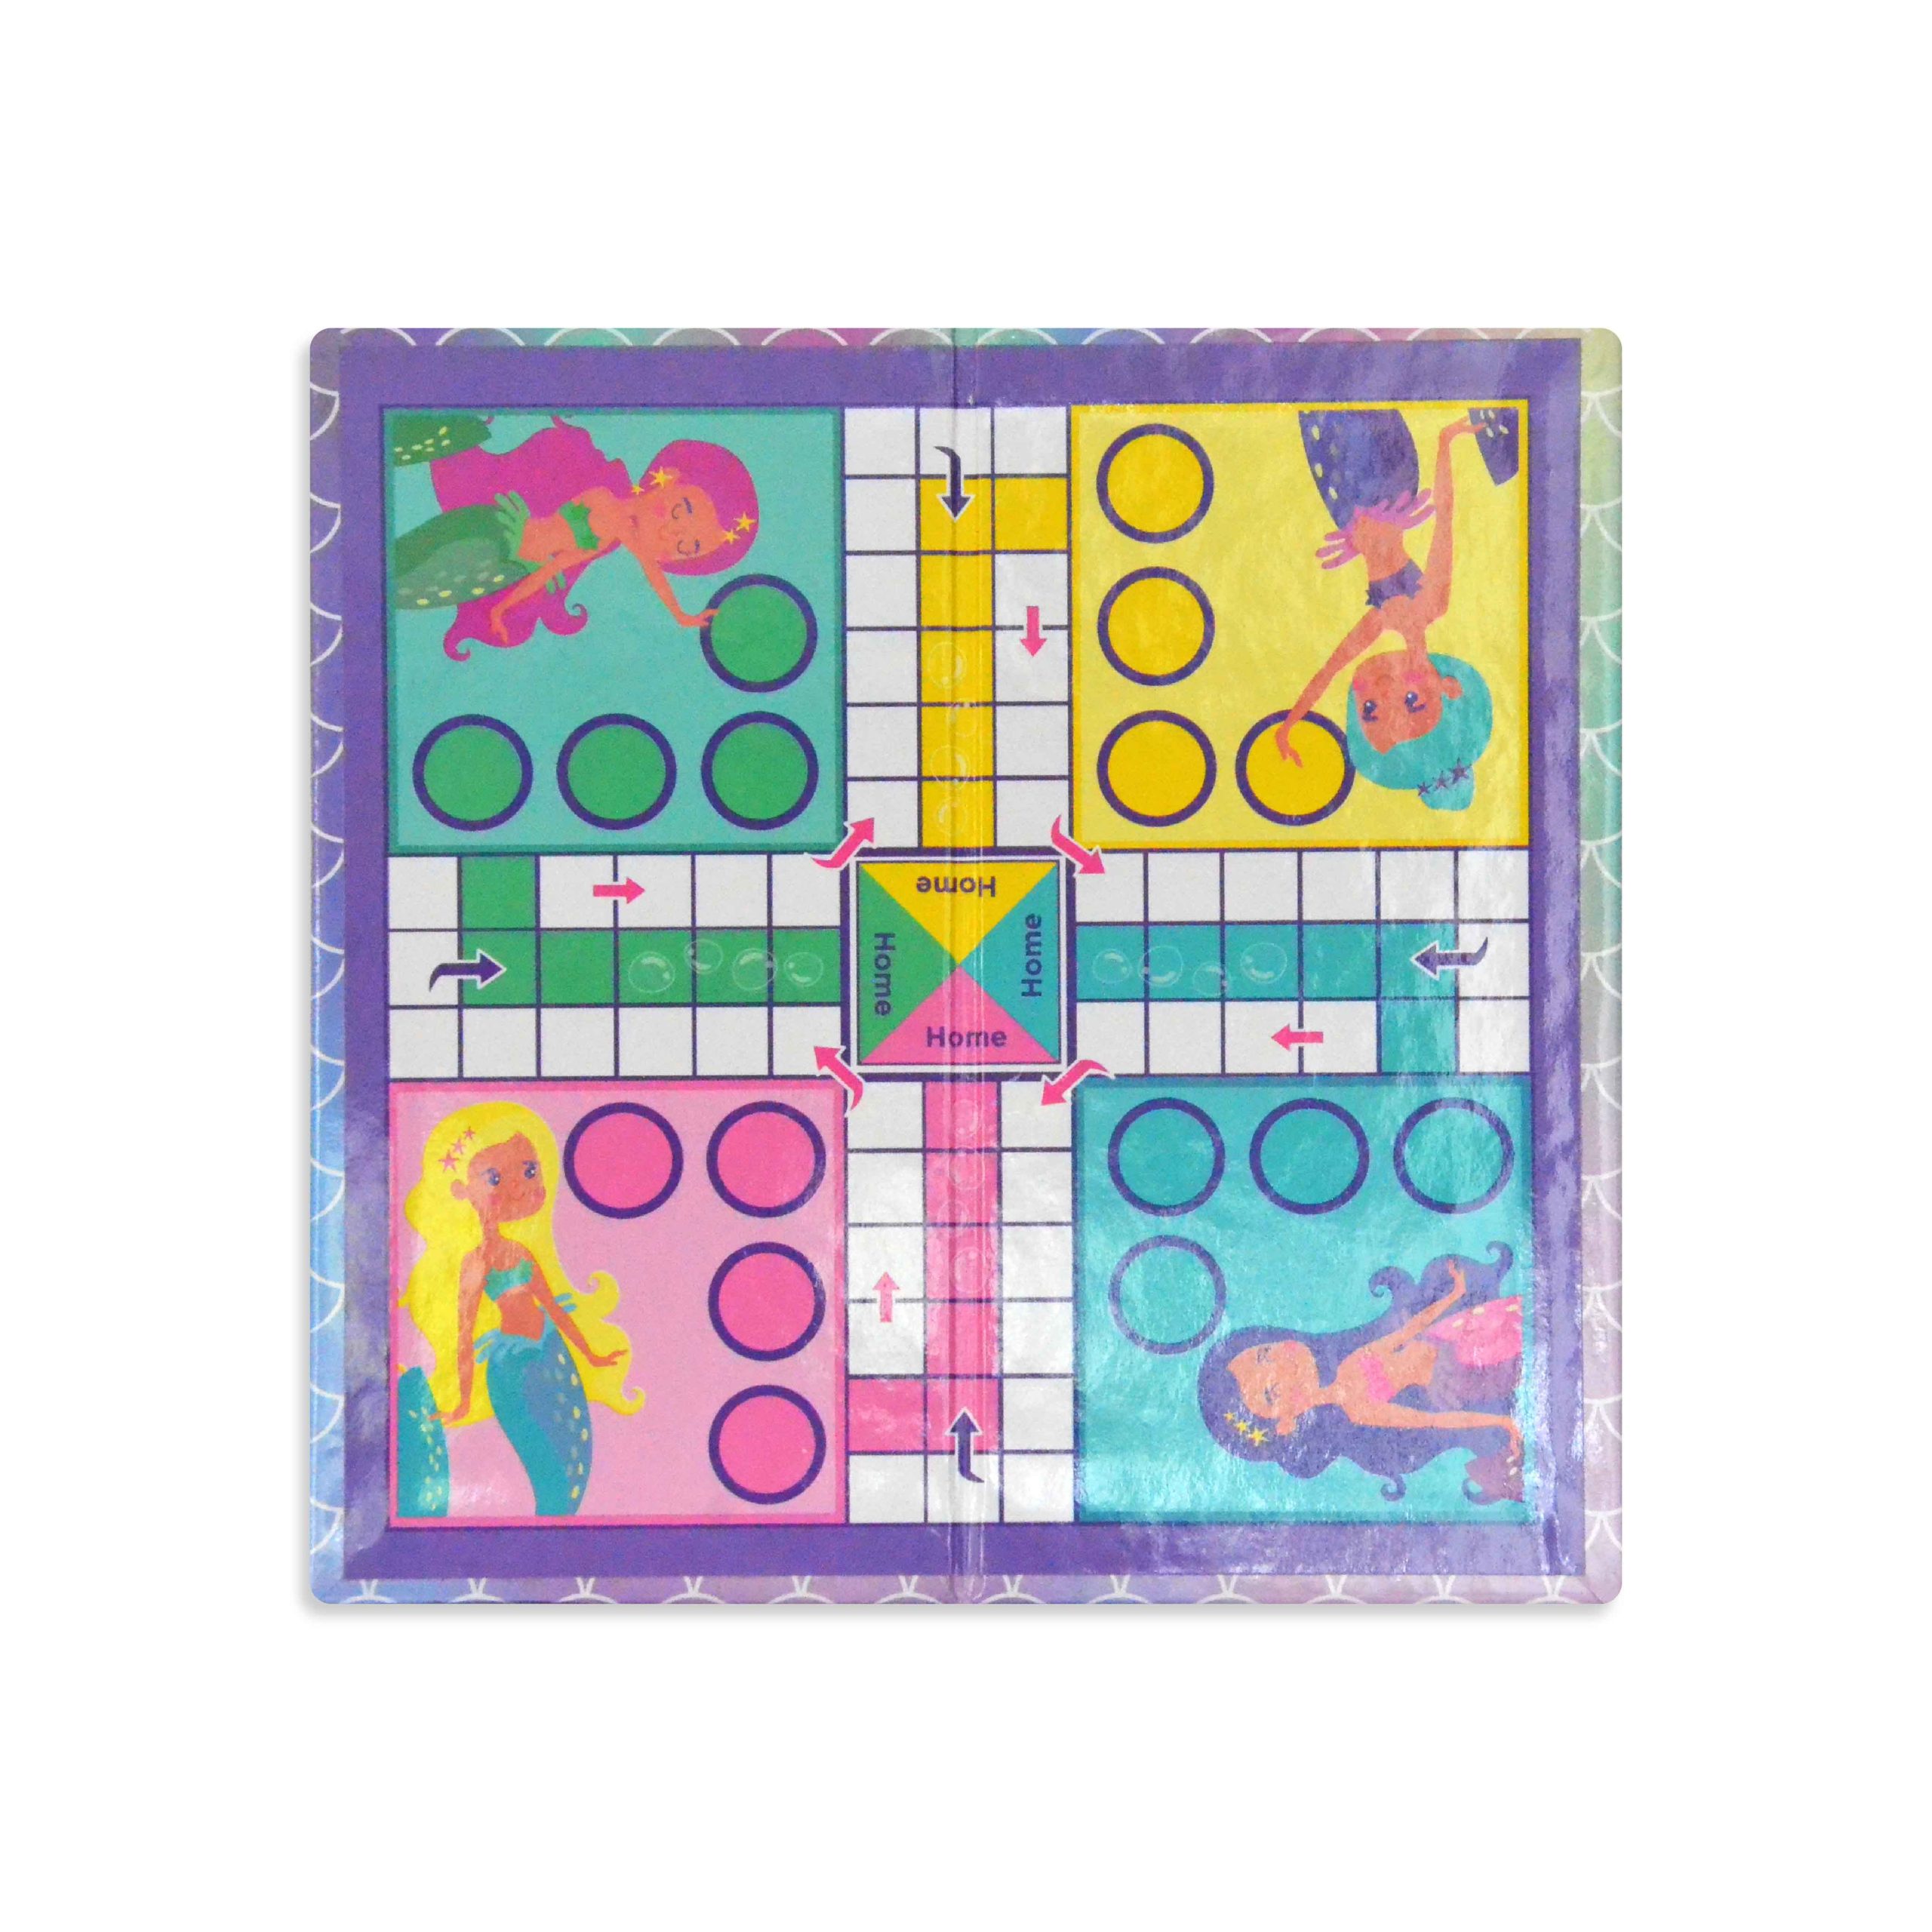 TY7535 LudoPufferfish and Bubbles 2 in 1 Board Game 03 scaled